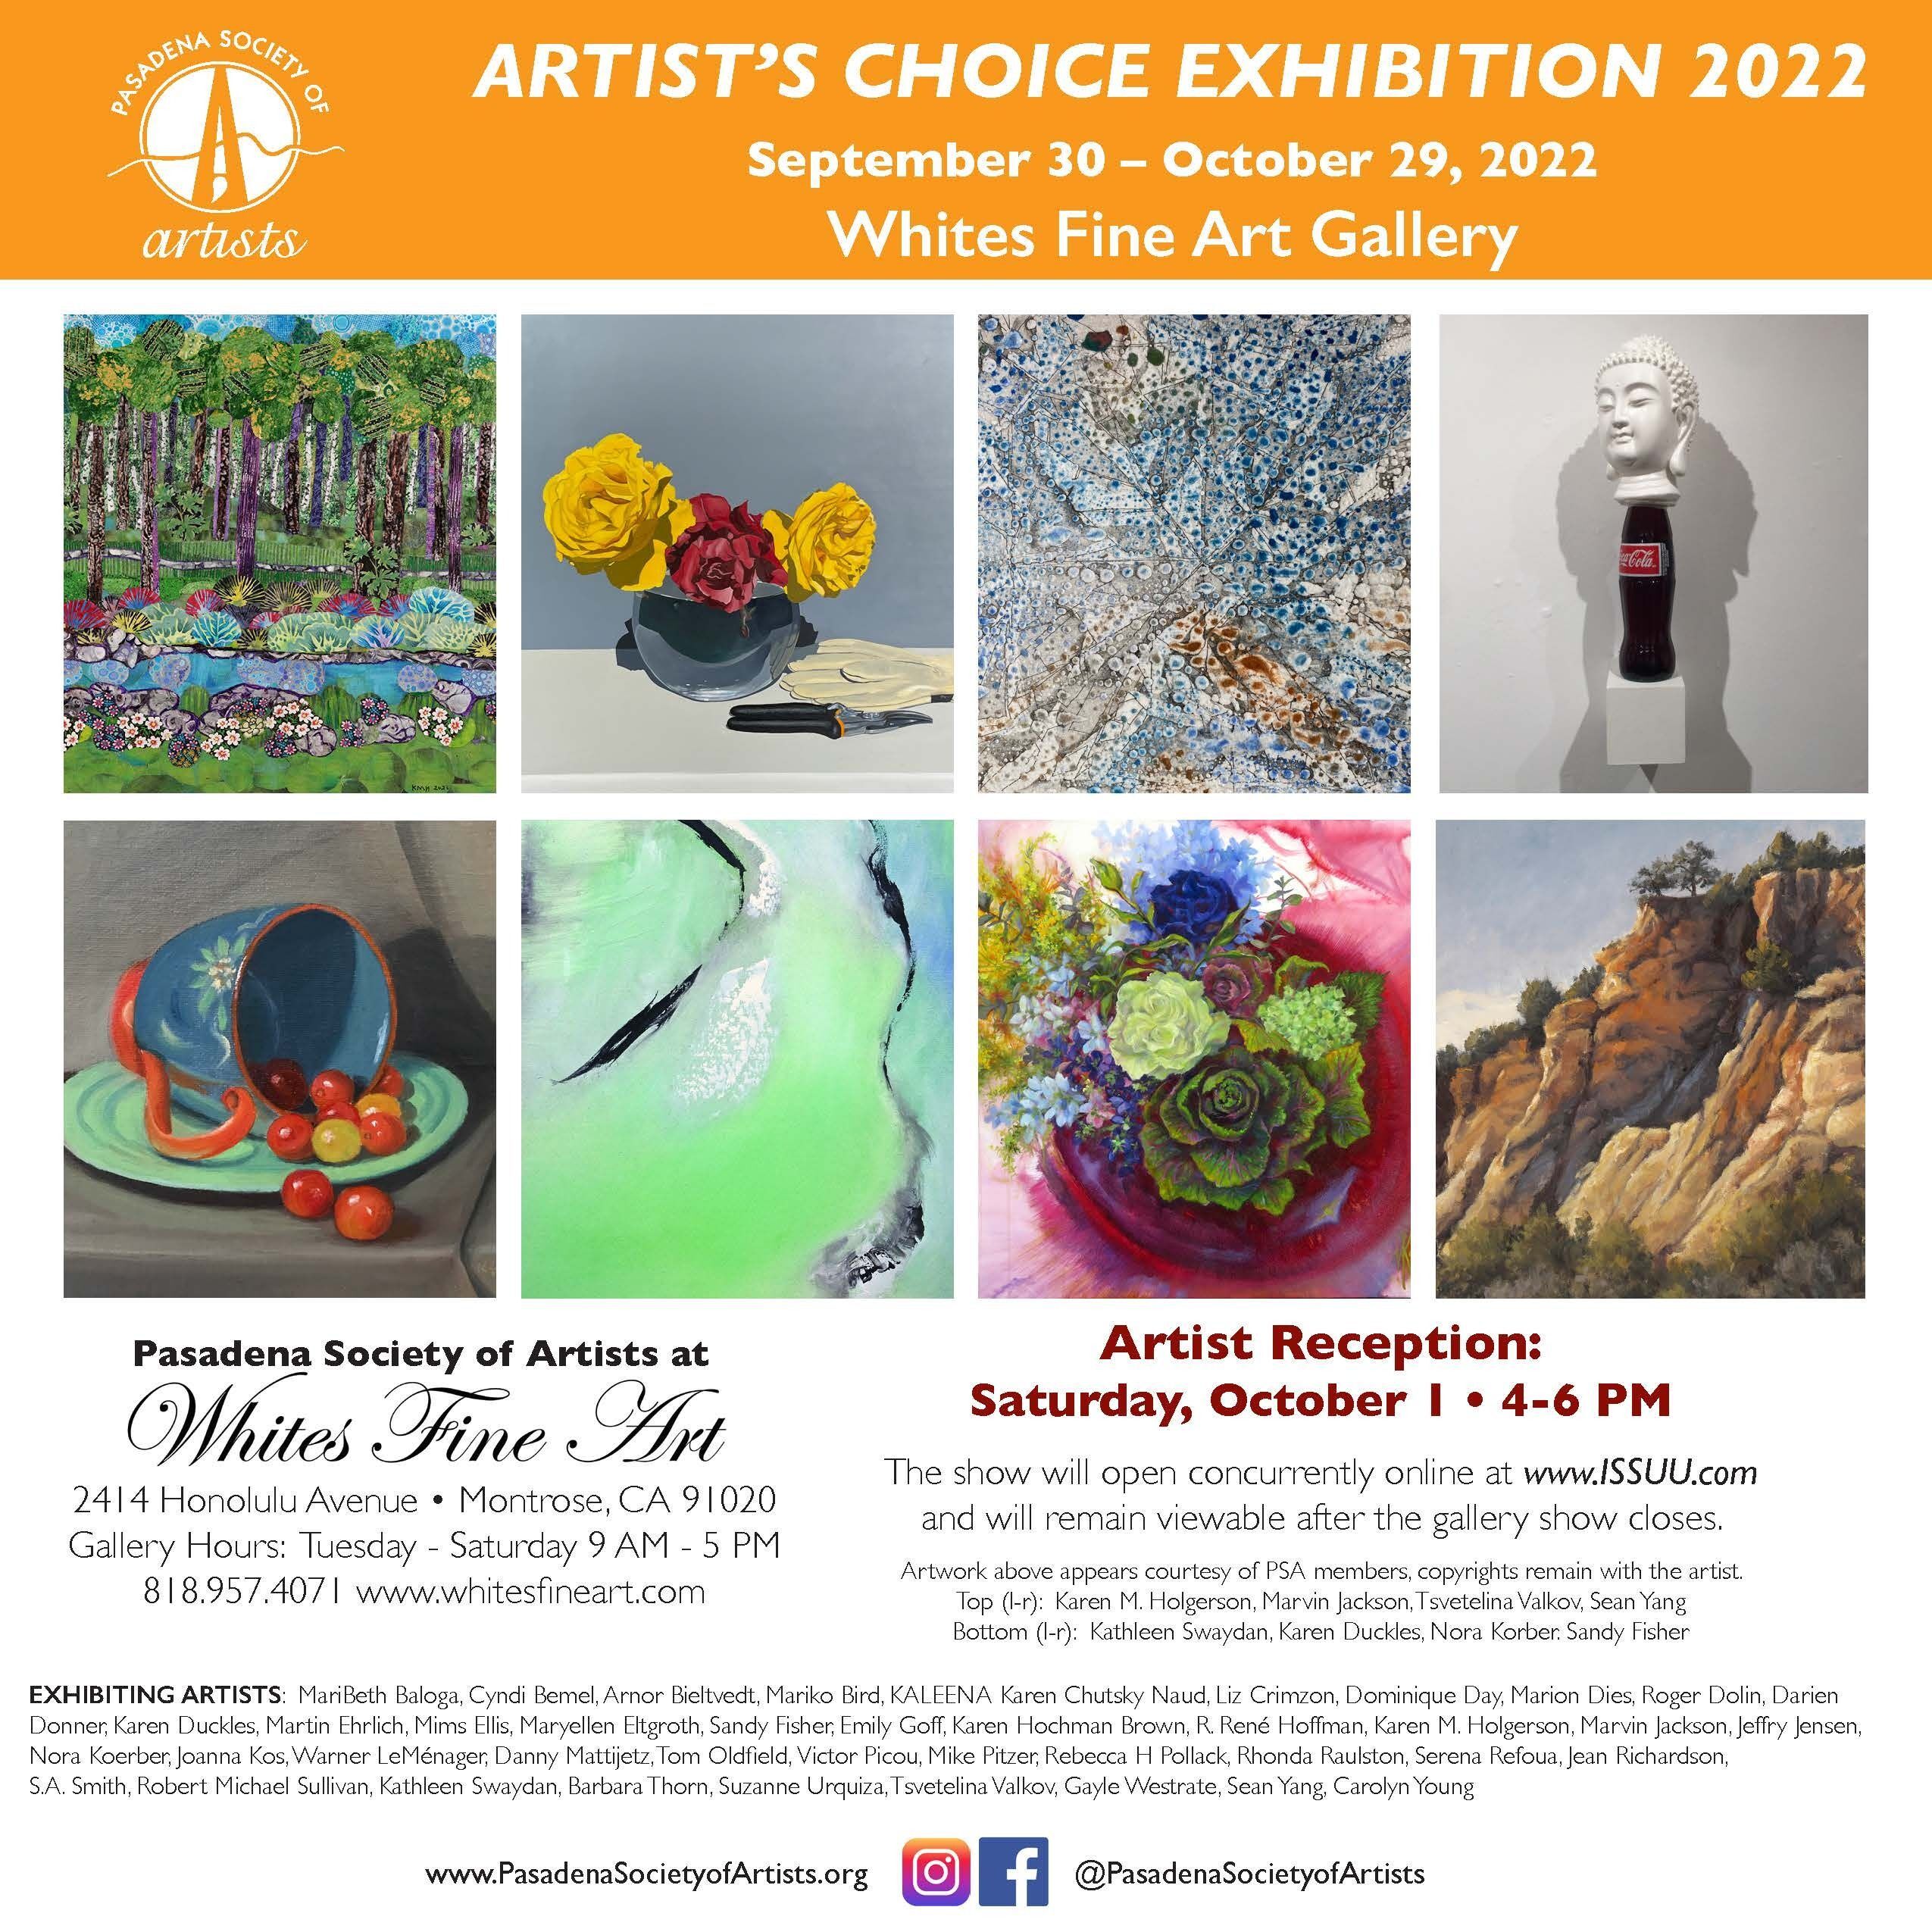 Artists' Choice Exhibition 2022